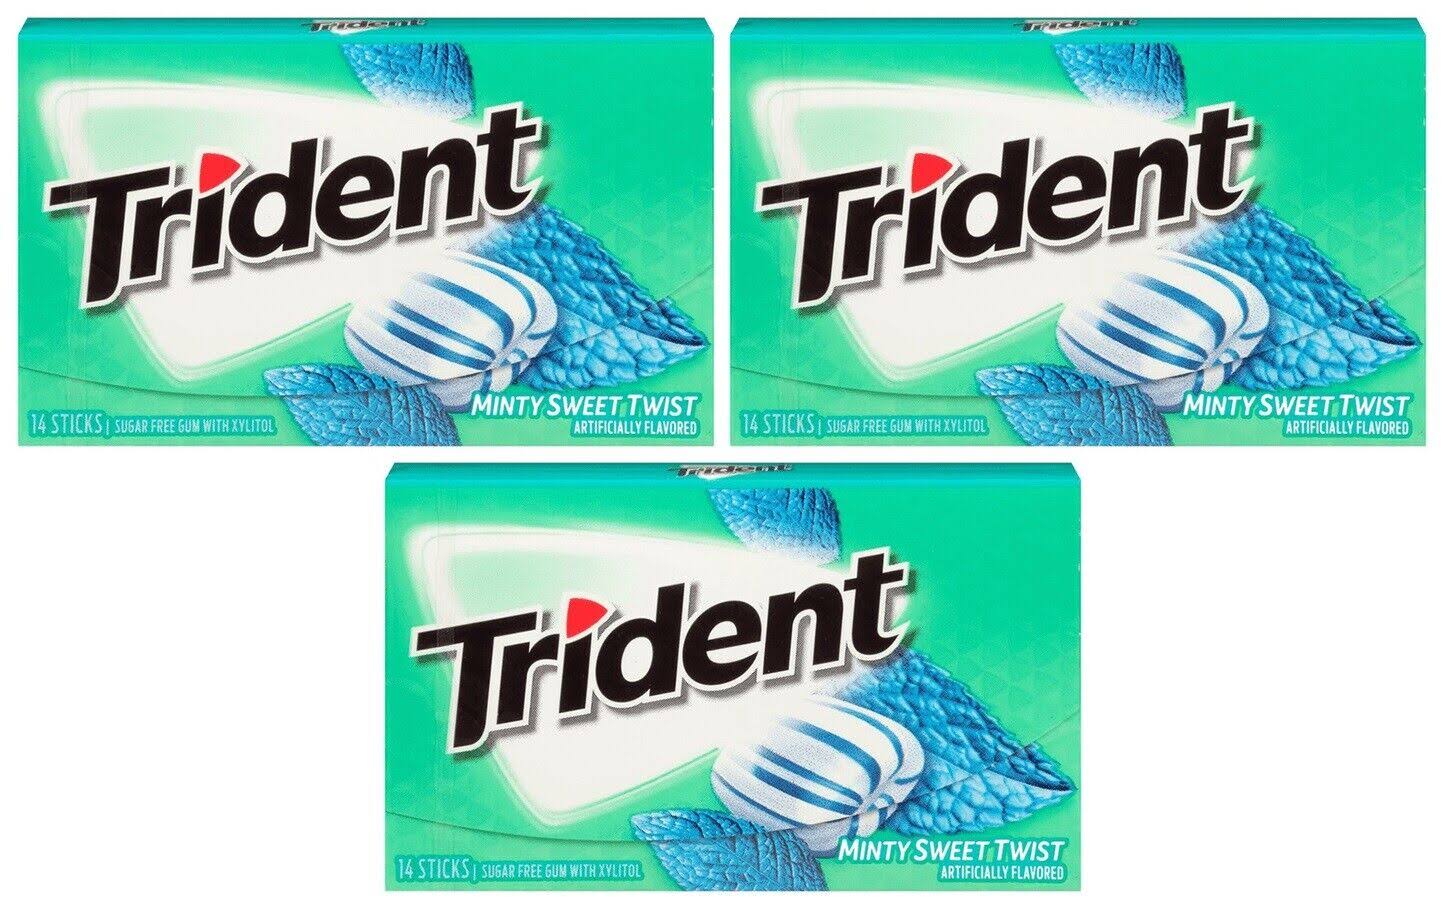 4x Trident Minty Sweet Twist Flavor Sugar Free Gum with Xylitol American Sweets